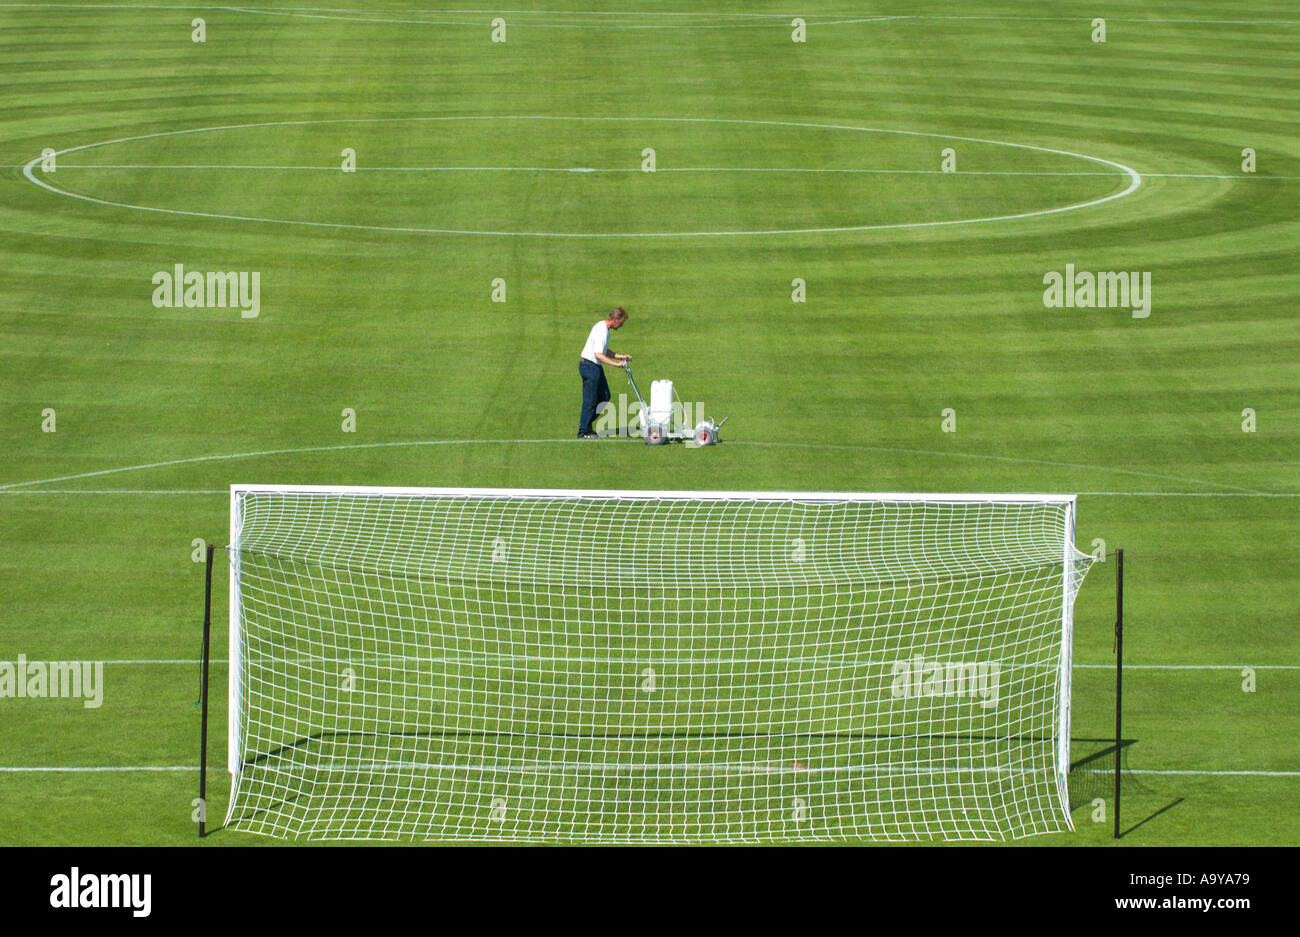 groundkeeper chalks the lines of the penalty box of a football pitch Stock Photo